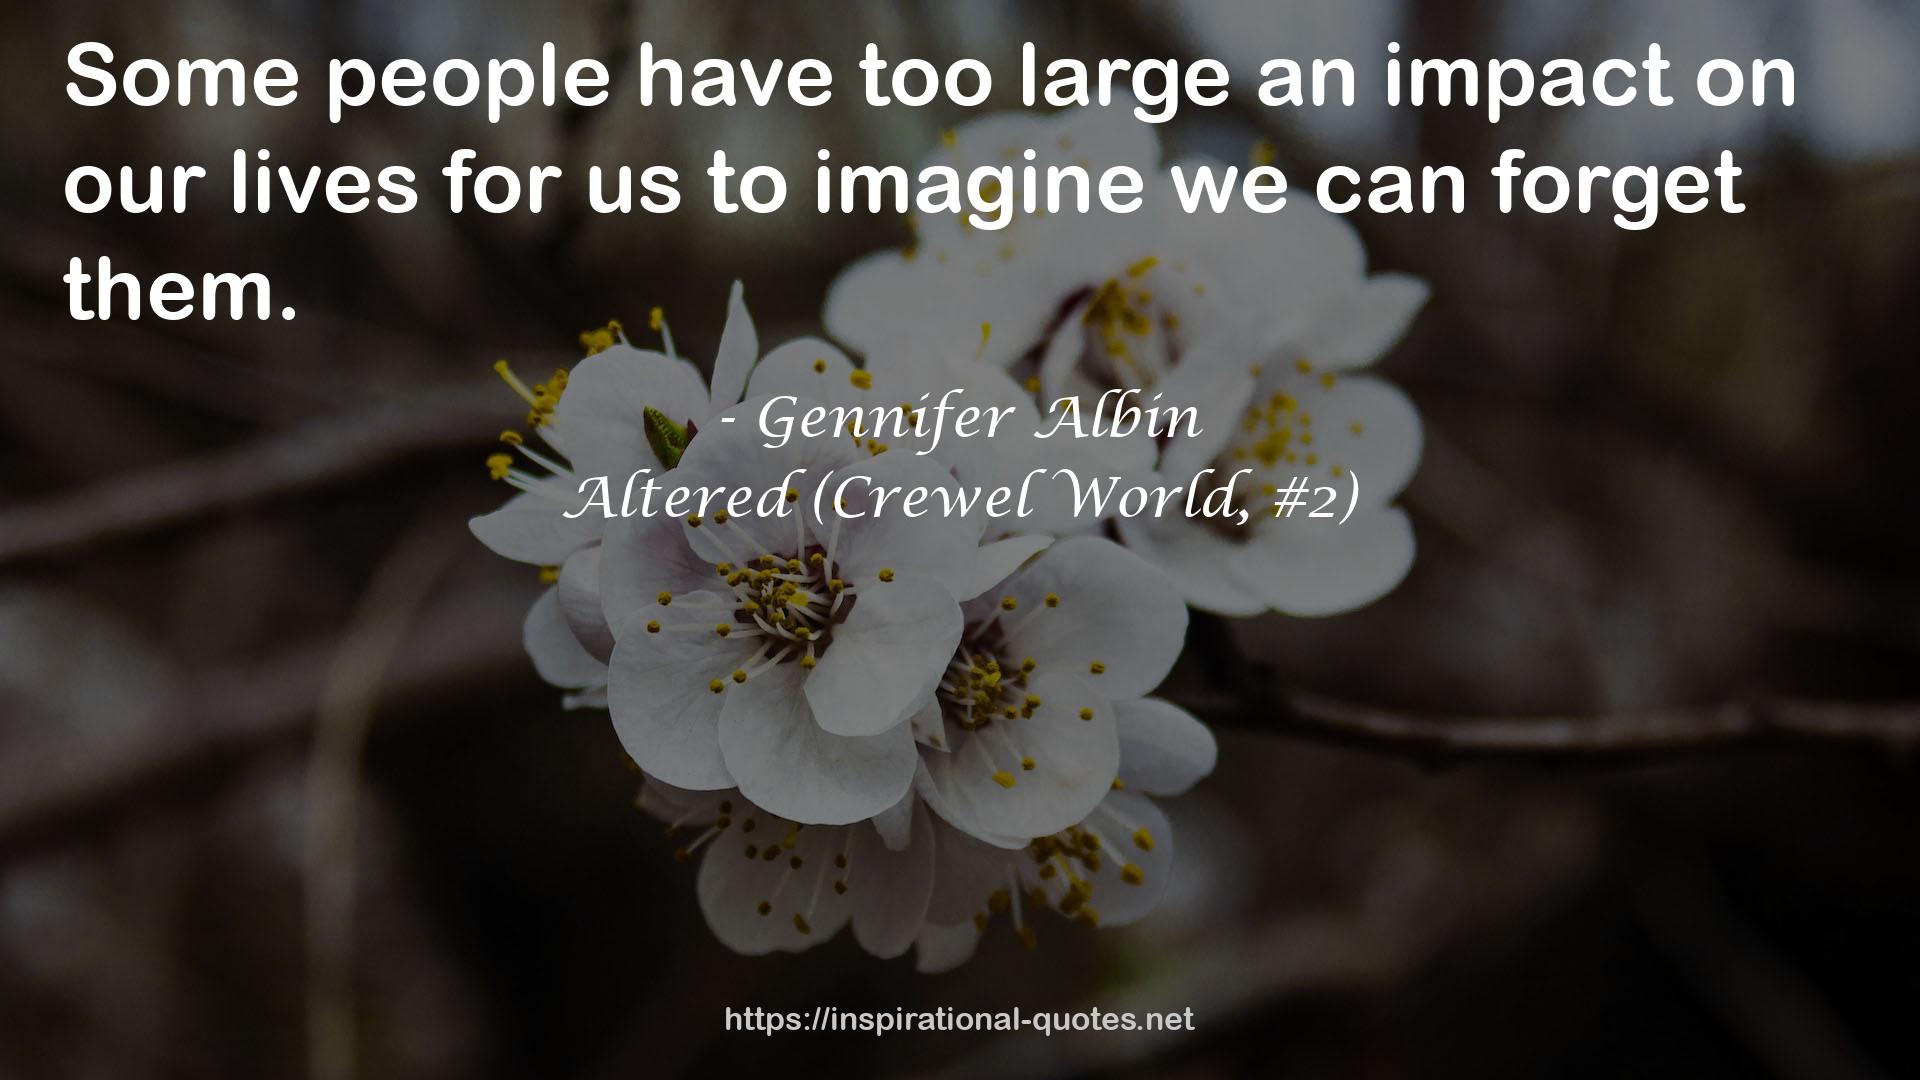 Altered (Crewel World, #2) QUOTES